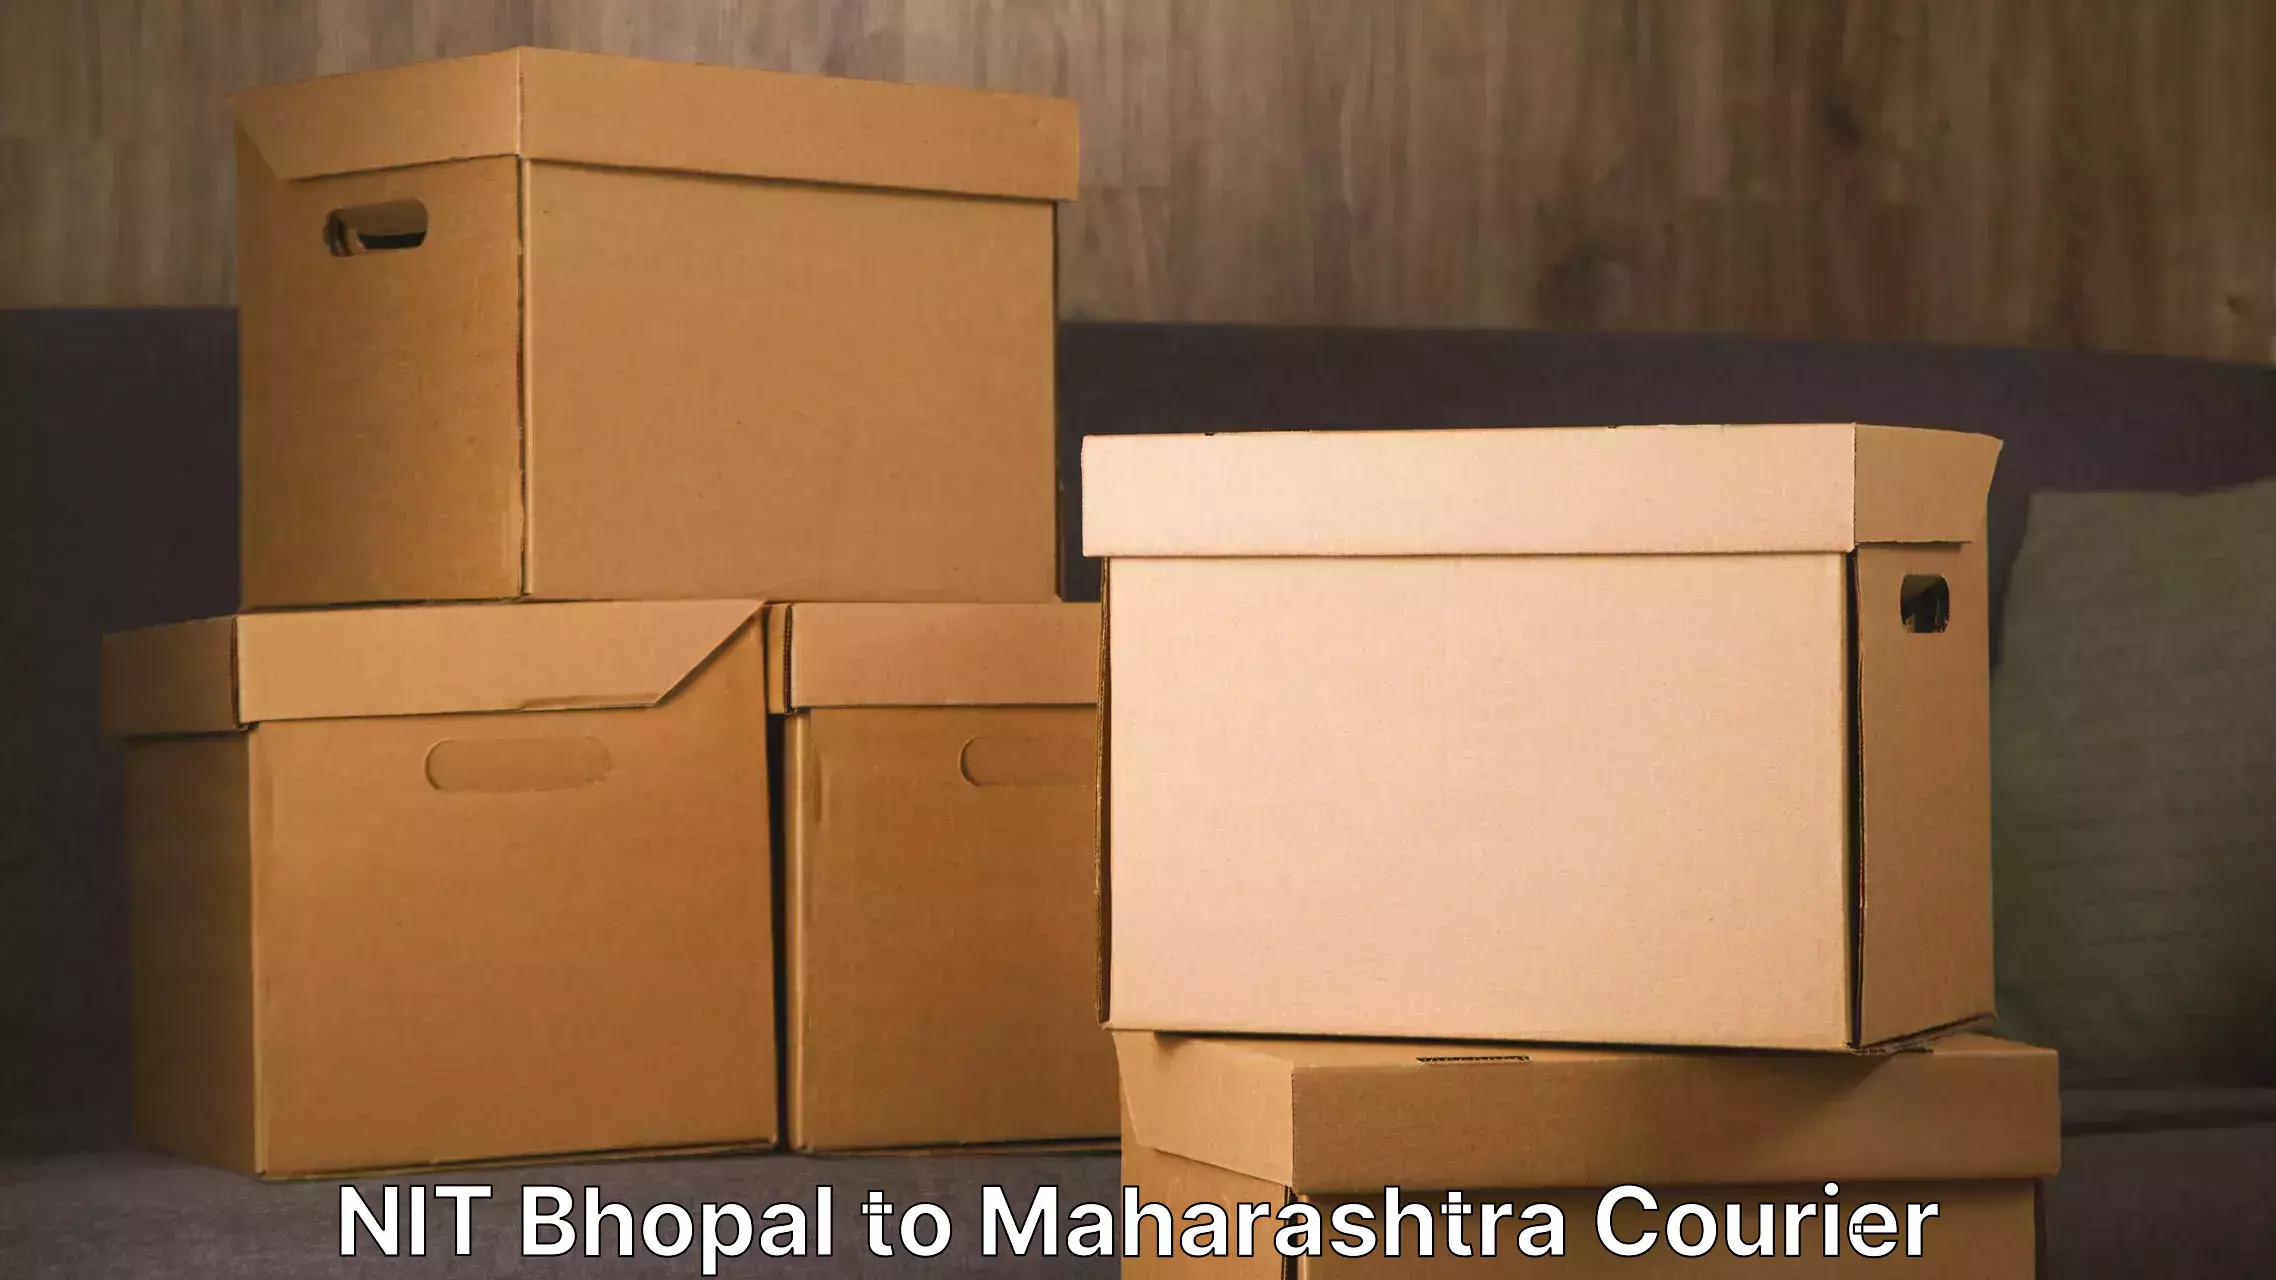 Quality moving and storage NIT Bhopal to Lonere